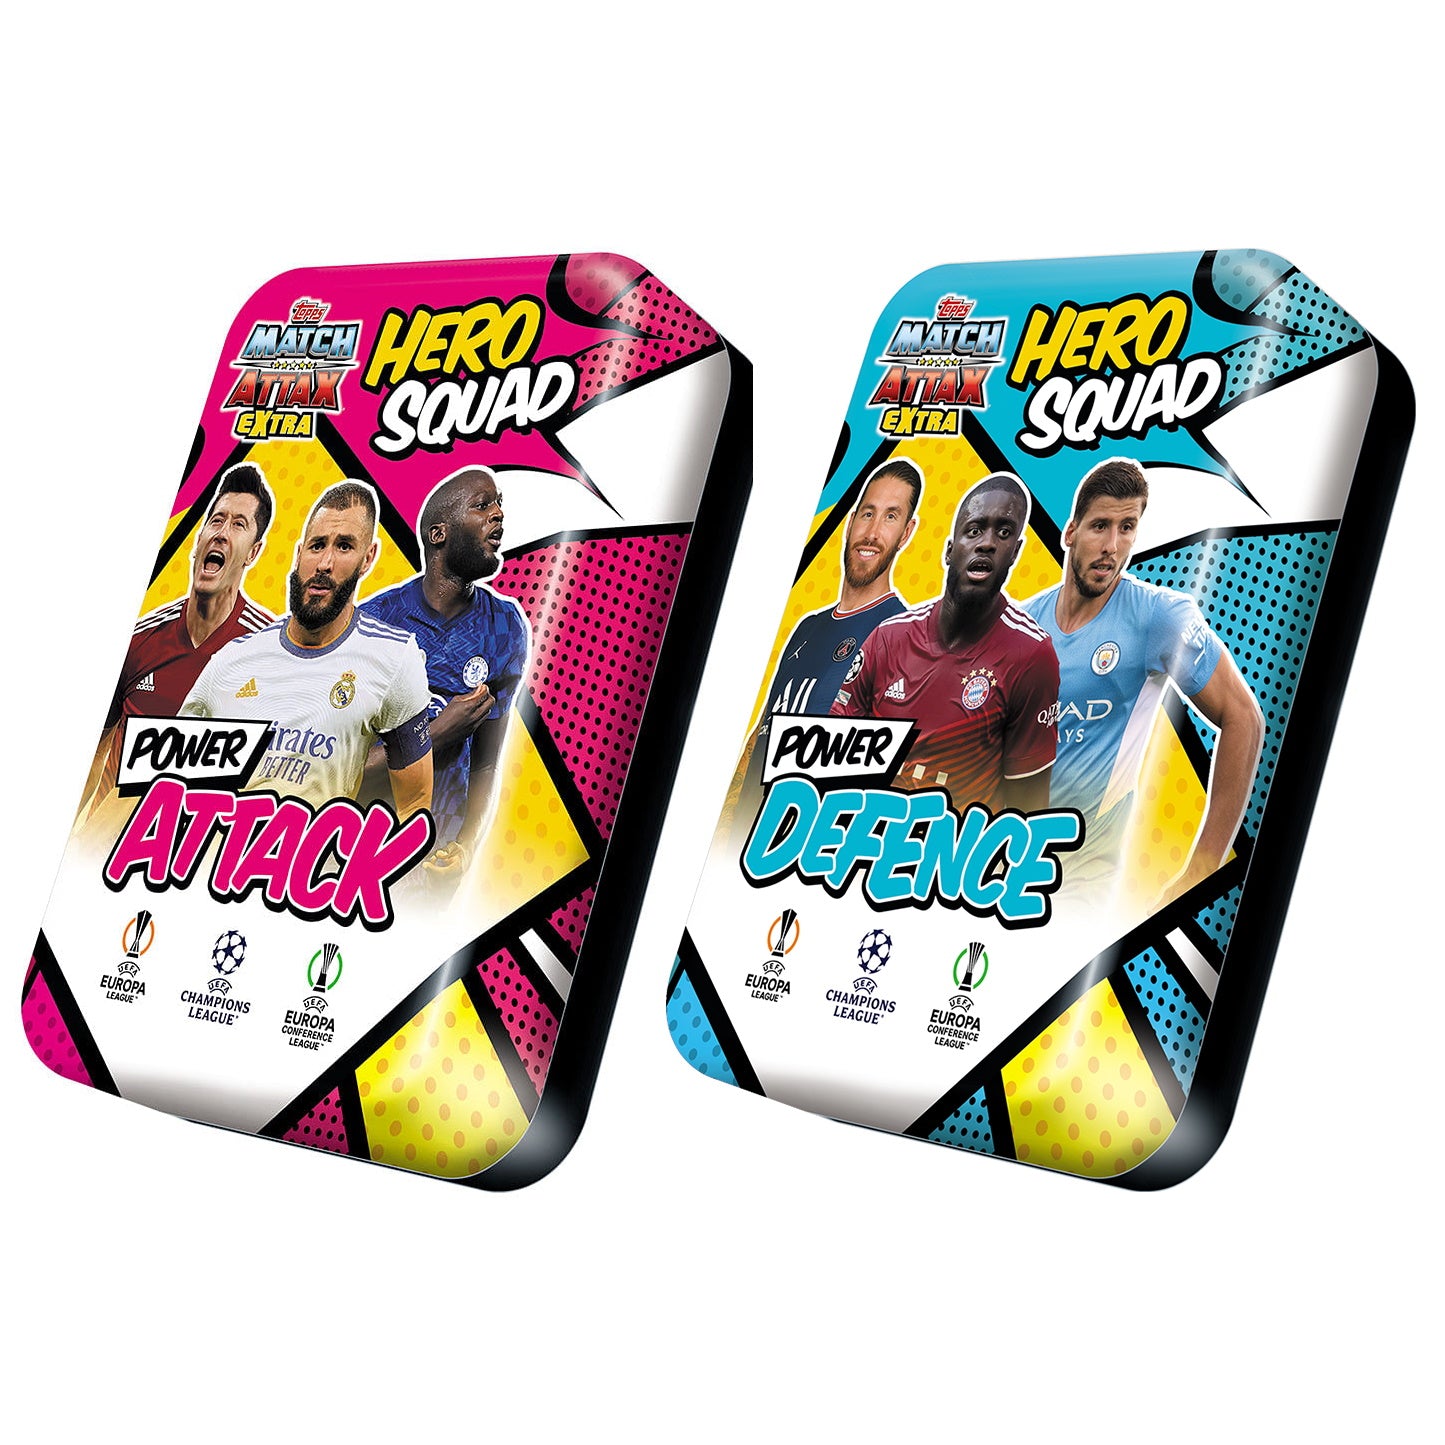 2021-22 TOPPS MATCH ATTAX EXTRA CHAMPIONS LEAGUE CARDS – POWER ATTACK & POWER DEFENCE MEGA TIN SET